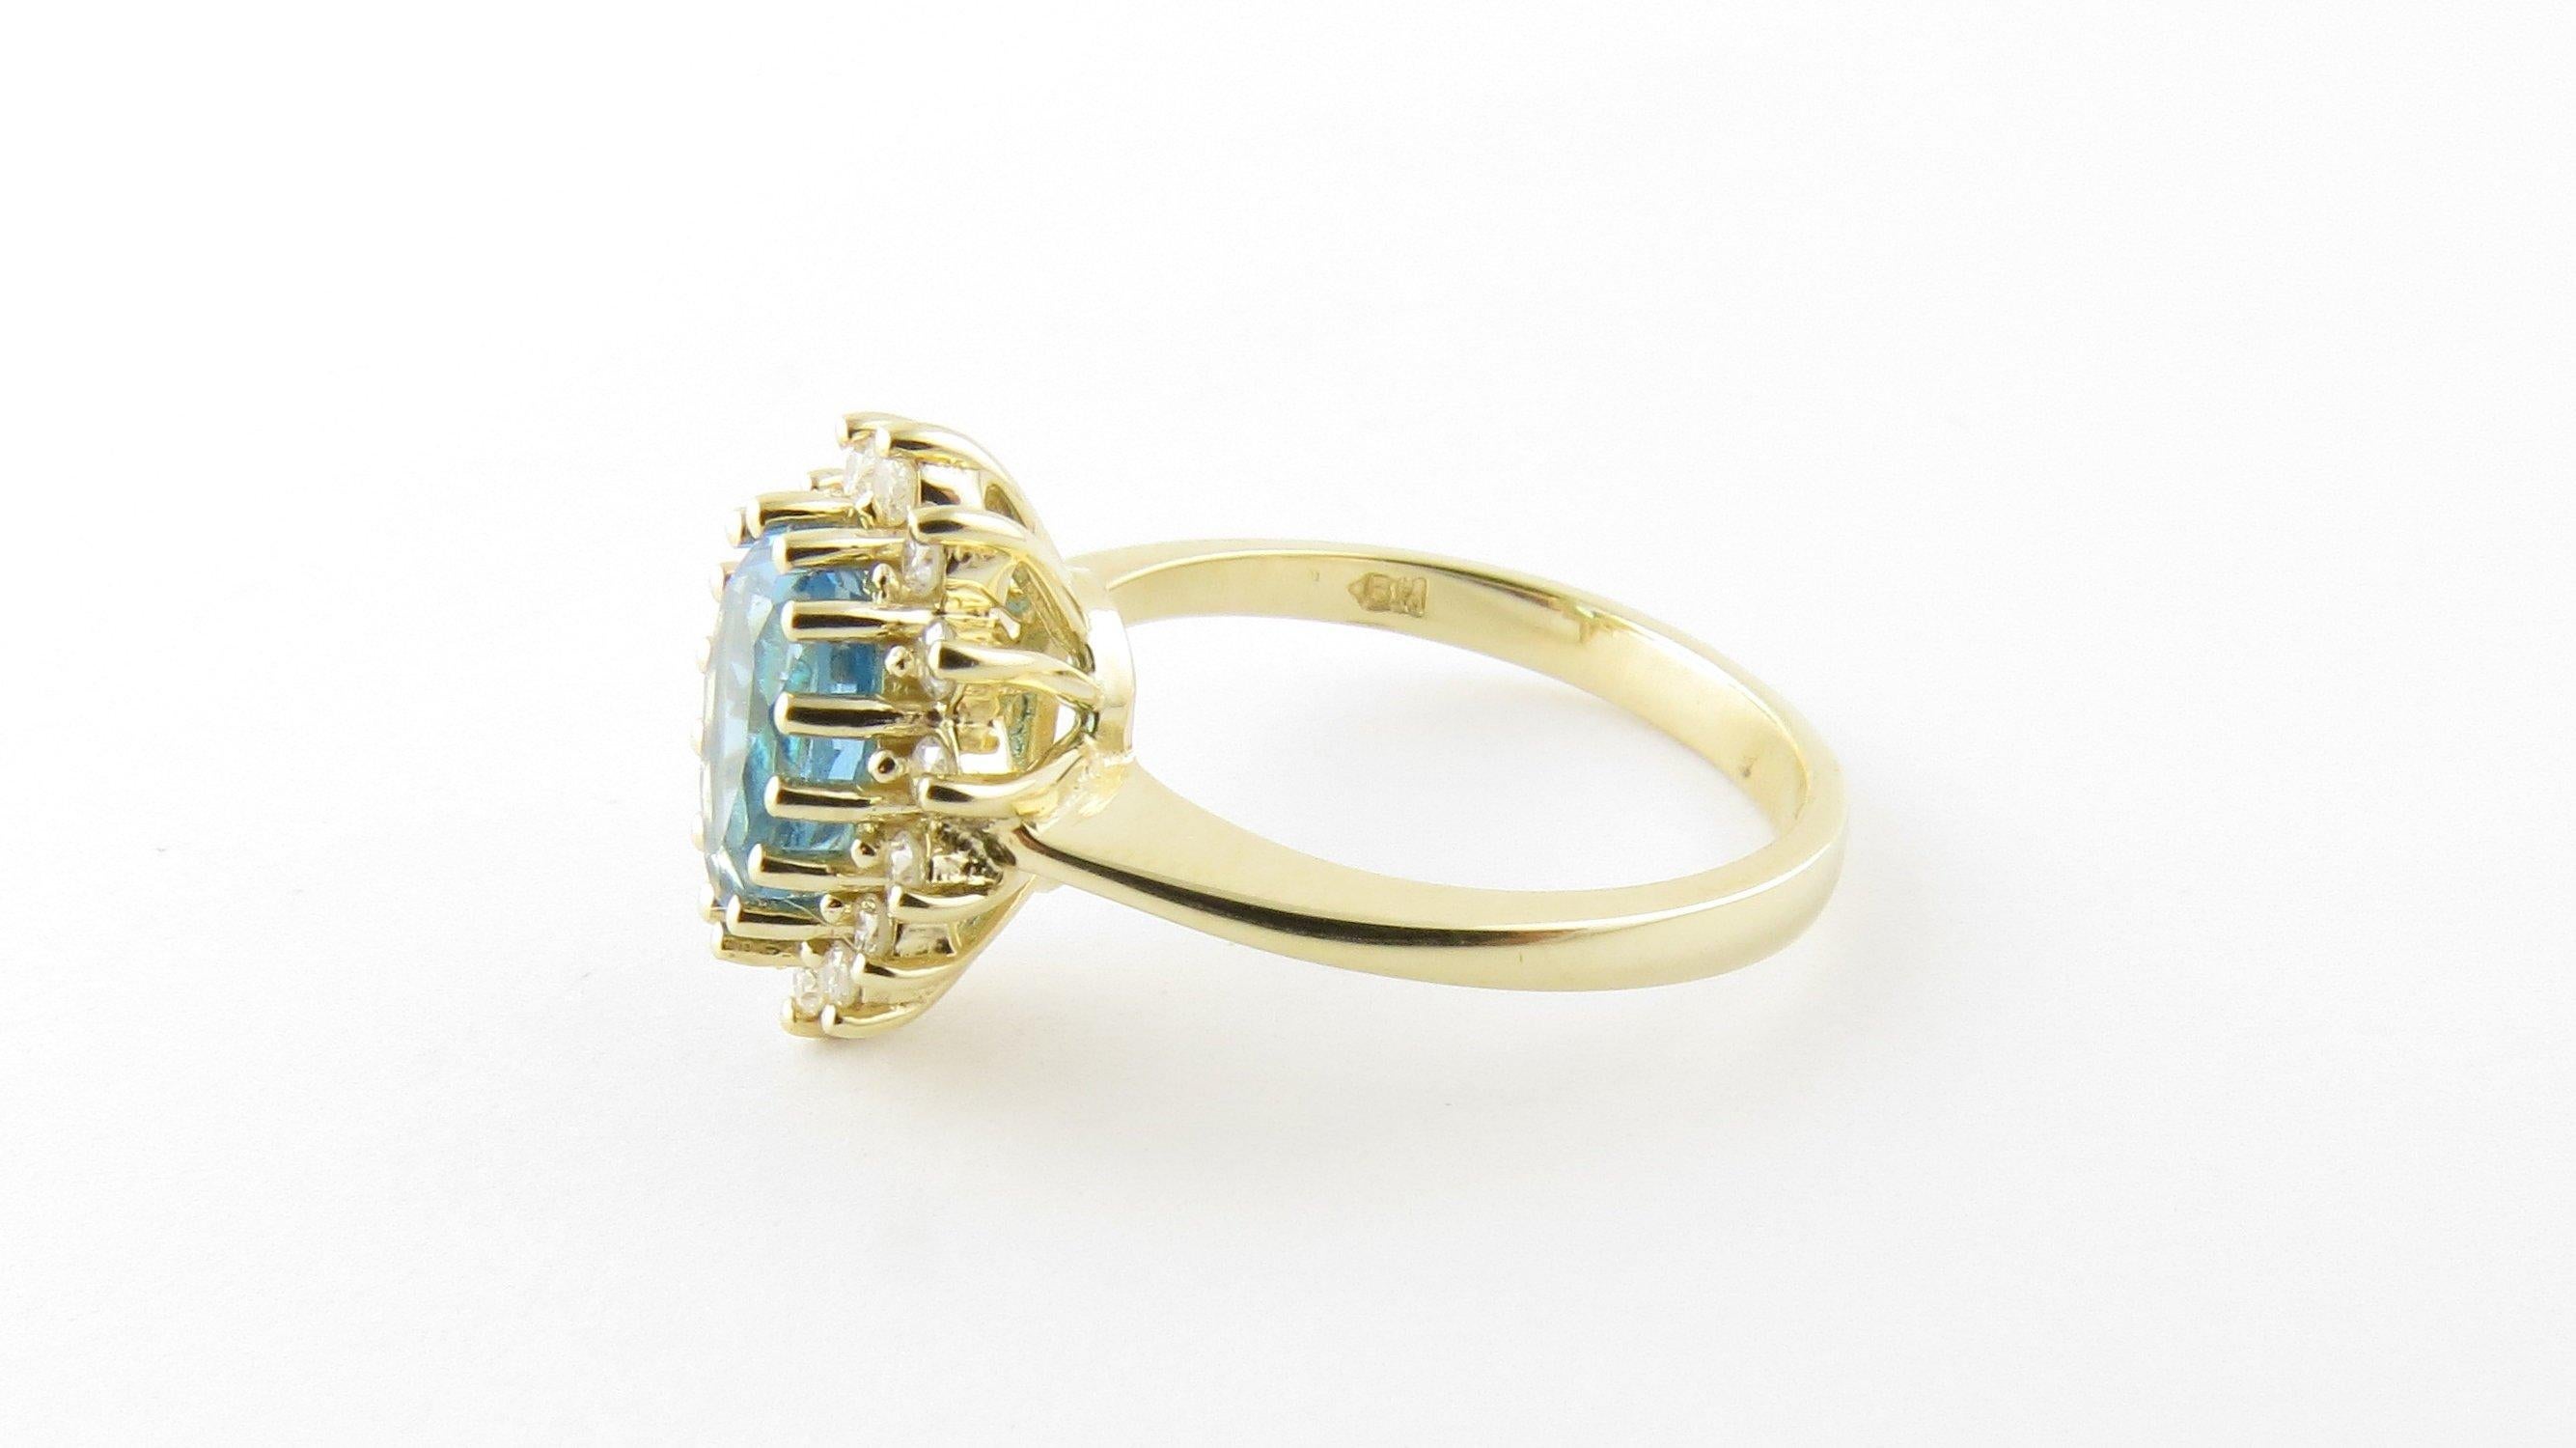 Vintage 14 Karat Yellow Gold Blue Topaz and Diamond Ring Size 6.75- This lovely ring features one pear shaped blue topaz (10 mm x 8 mm) surrounded by 14 round brilliant cut diamonds and set in classic 14K yellow gold. Top of ring measures 14 mm x 12